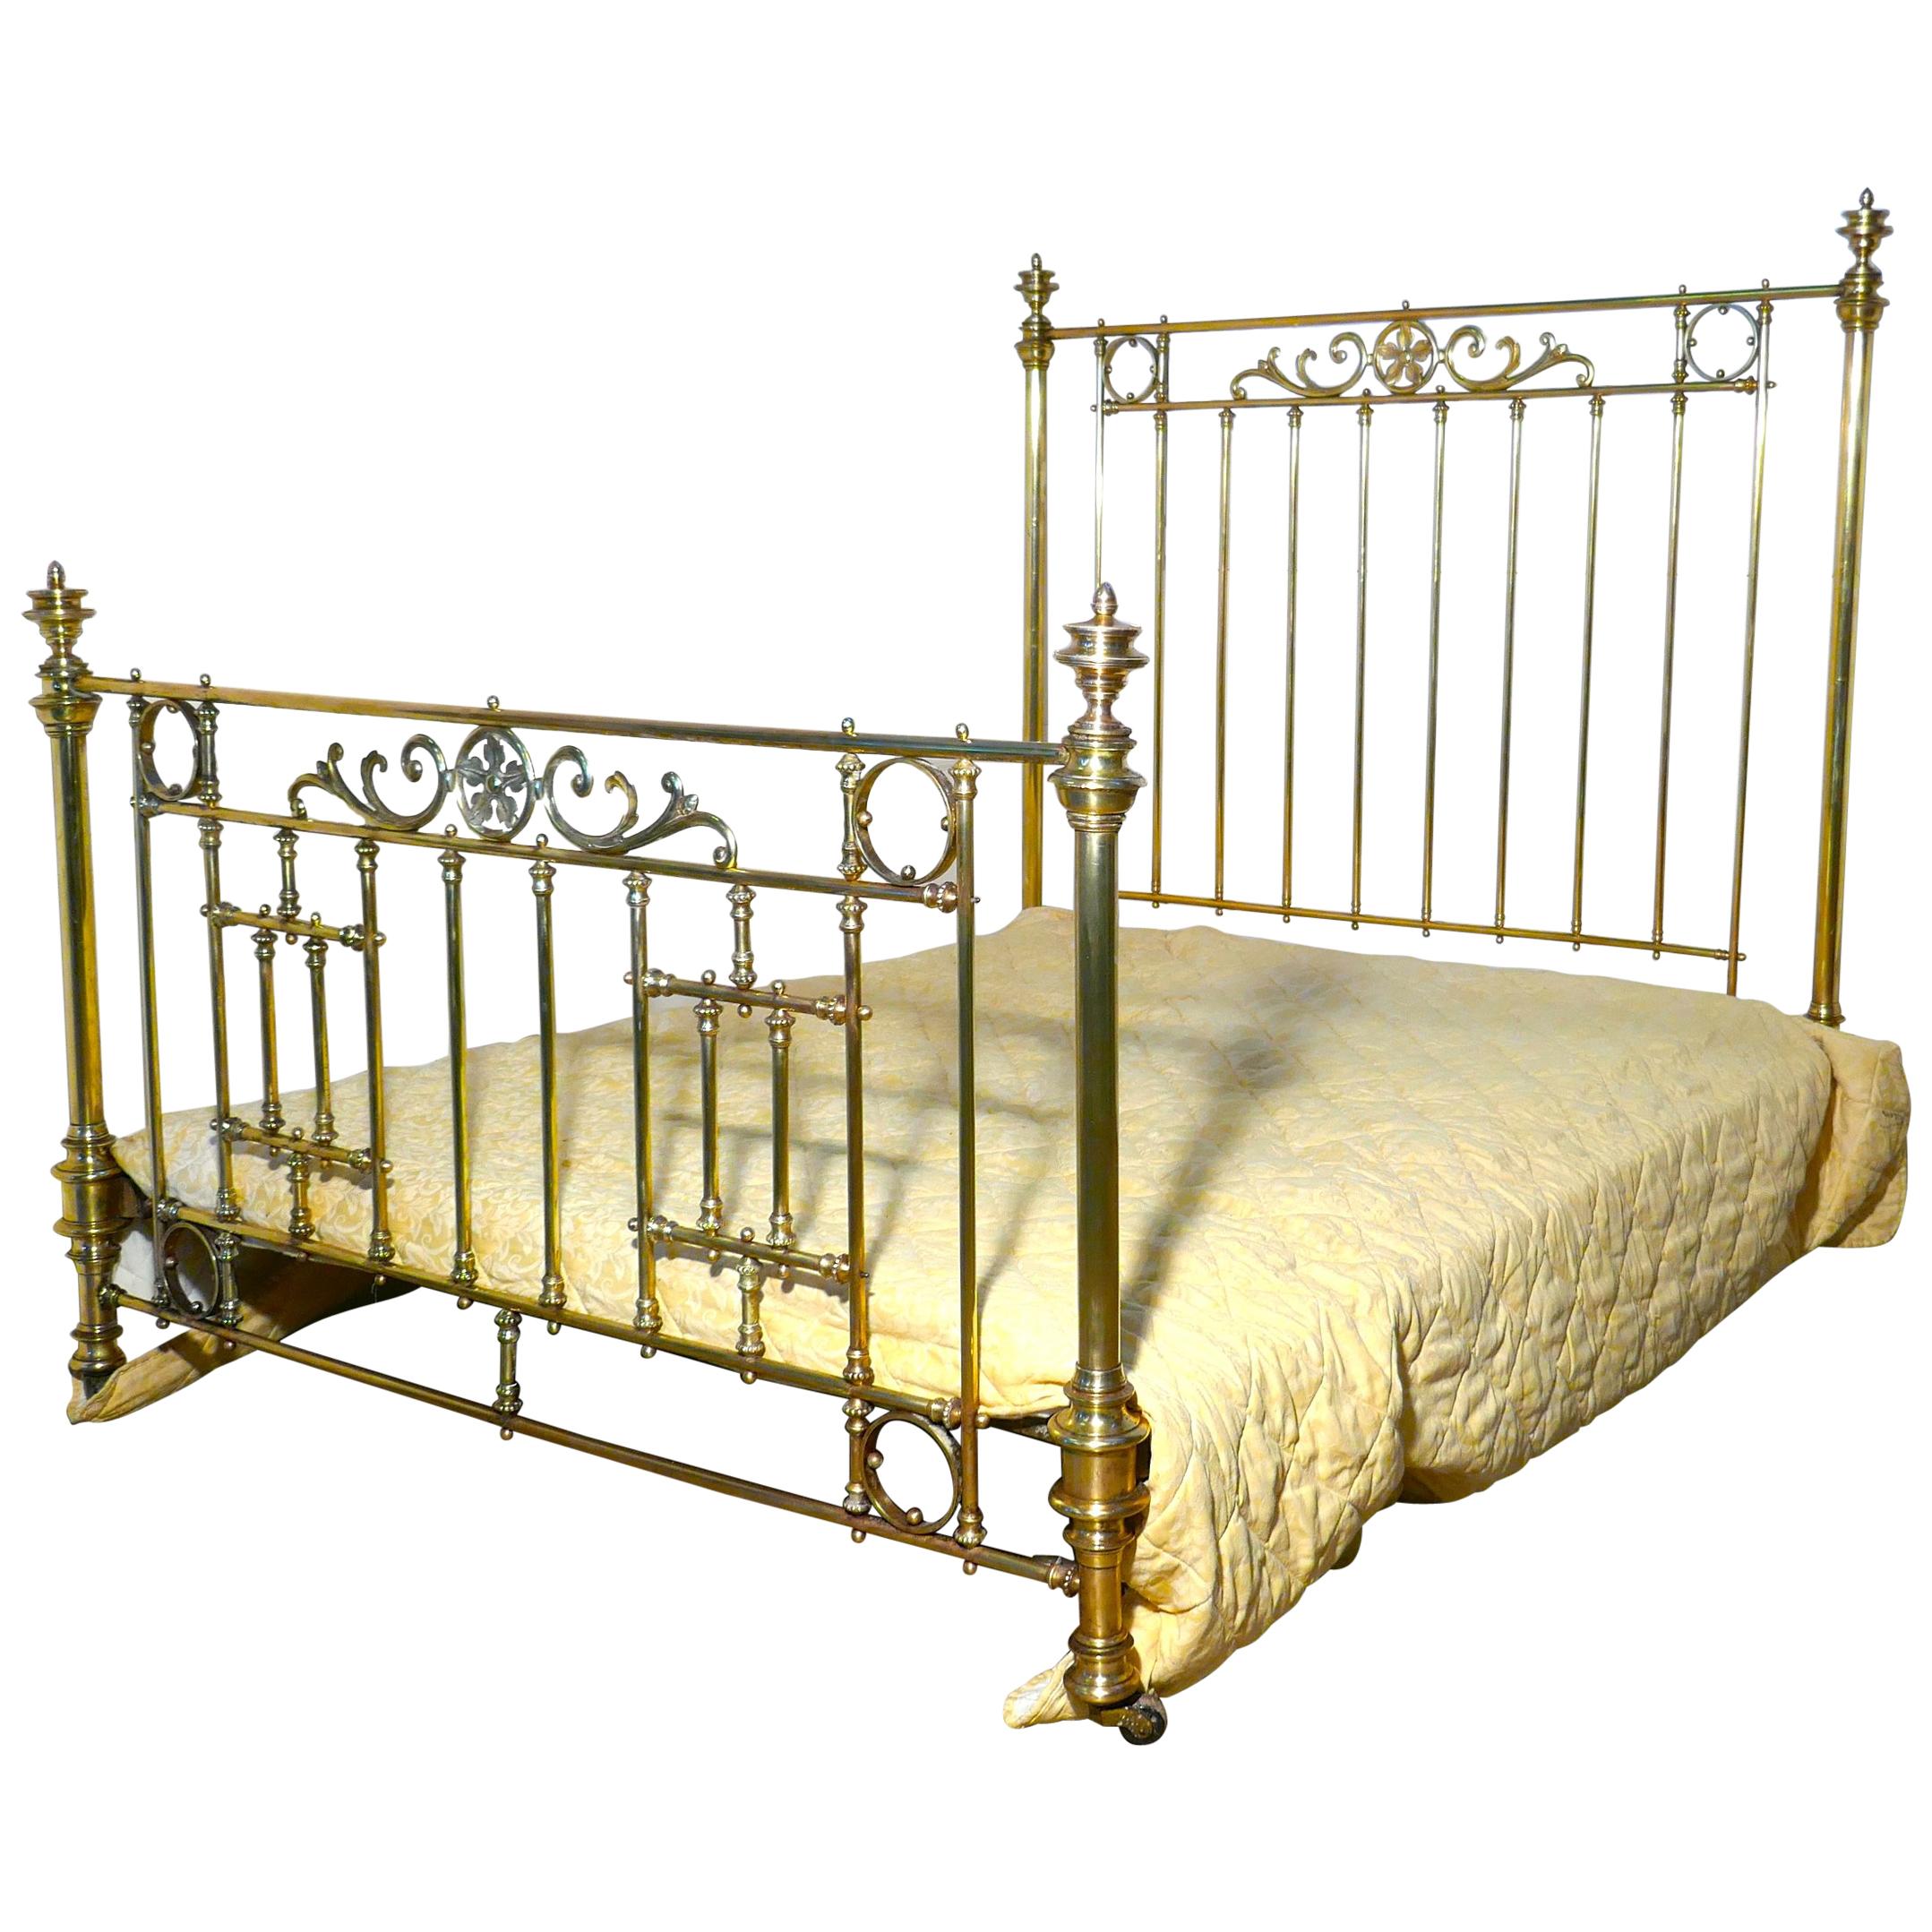 Spectacular French Art Nouveau Brass King-Size Bed